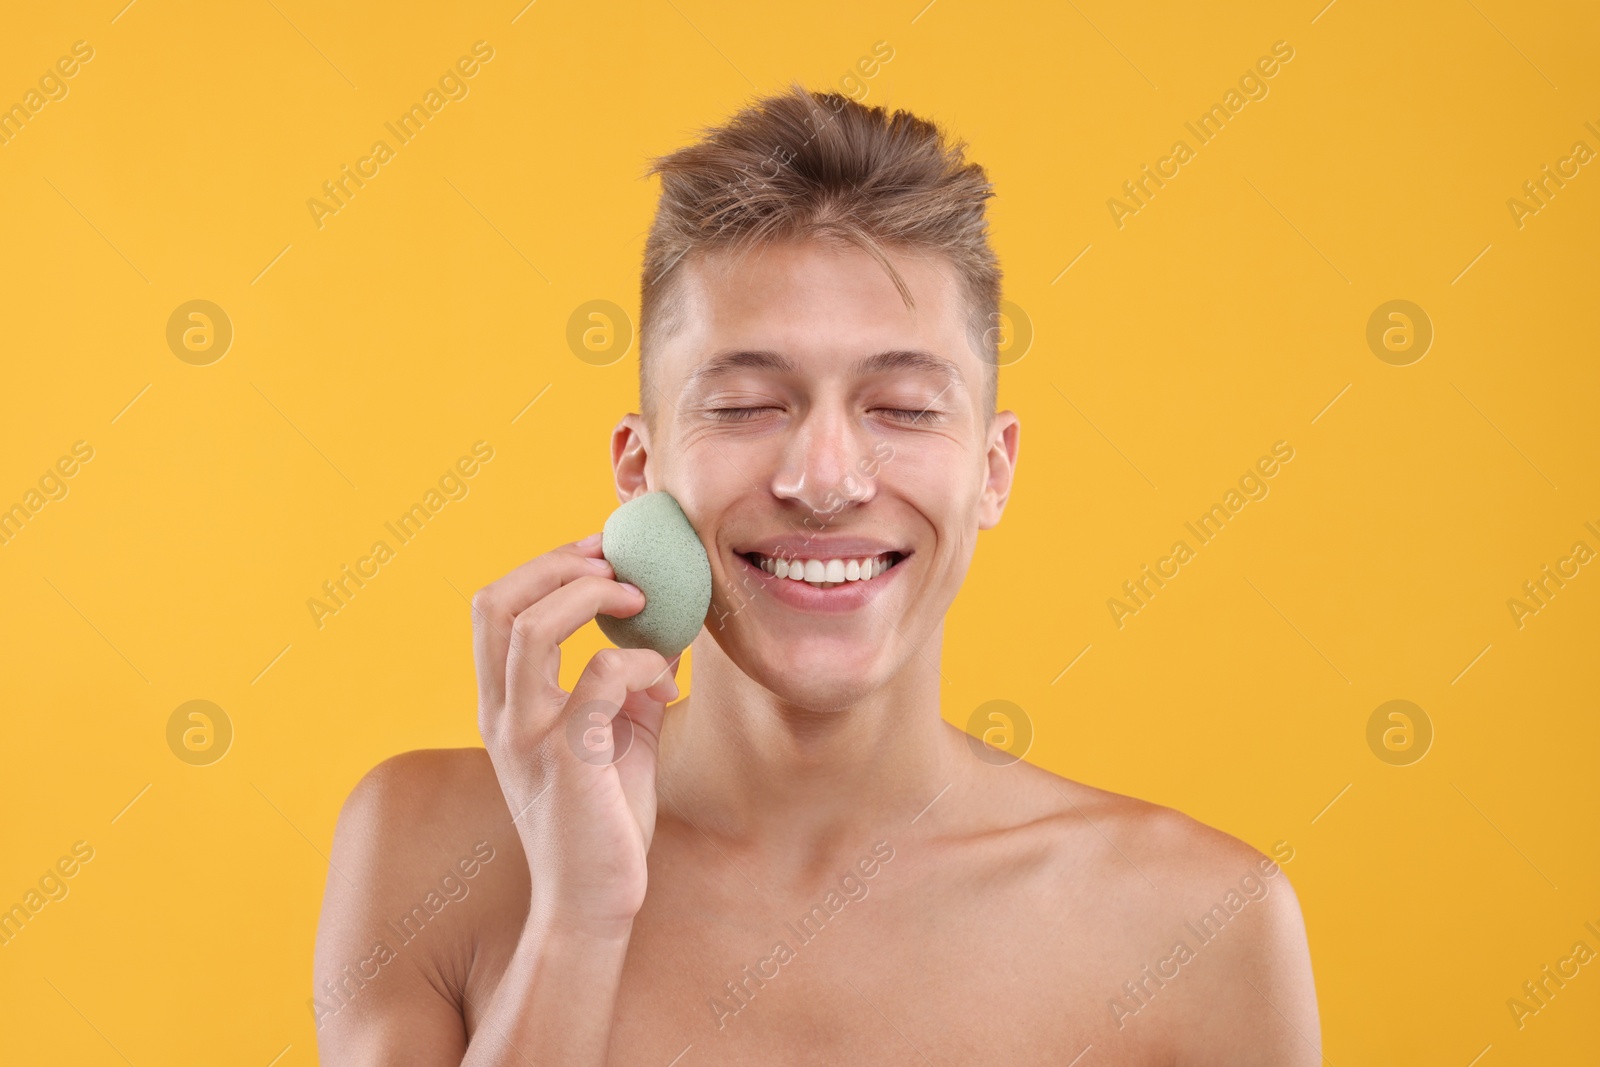 Photo of Happy young man washing his face with sponge on orange background